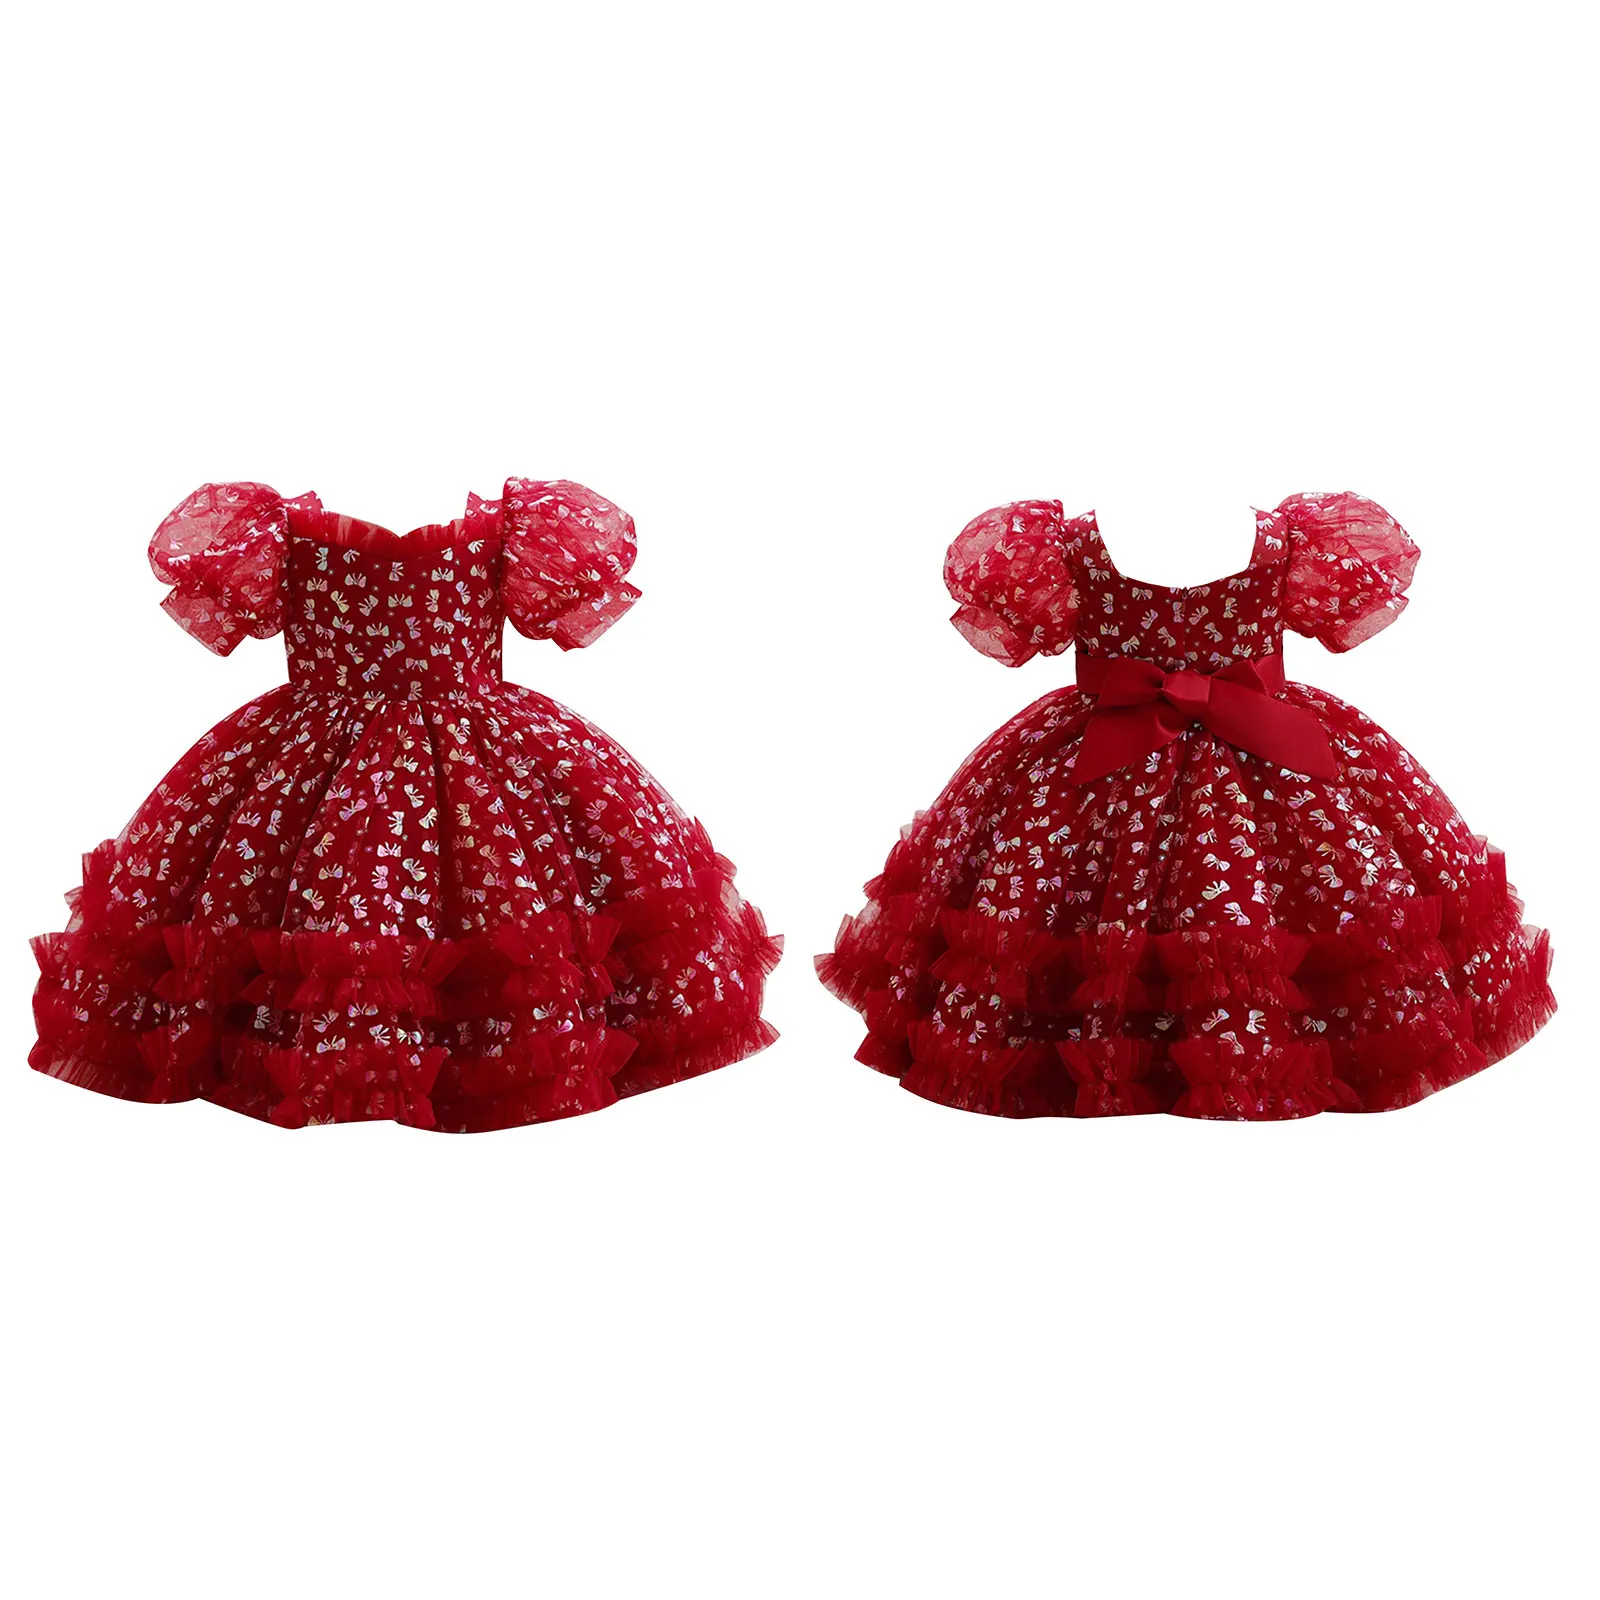 

ZDHoor Baby Girls Toddlers Princess Dress Short Bubble Sleeve Bowknot Print Frilly Tulle Dress Wedding Flower Performance Dress